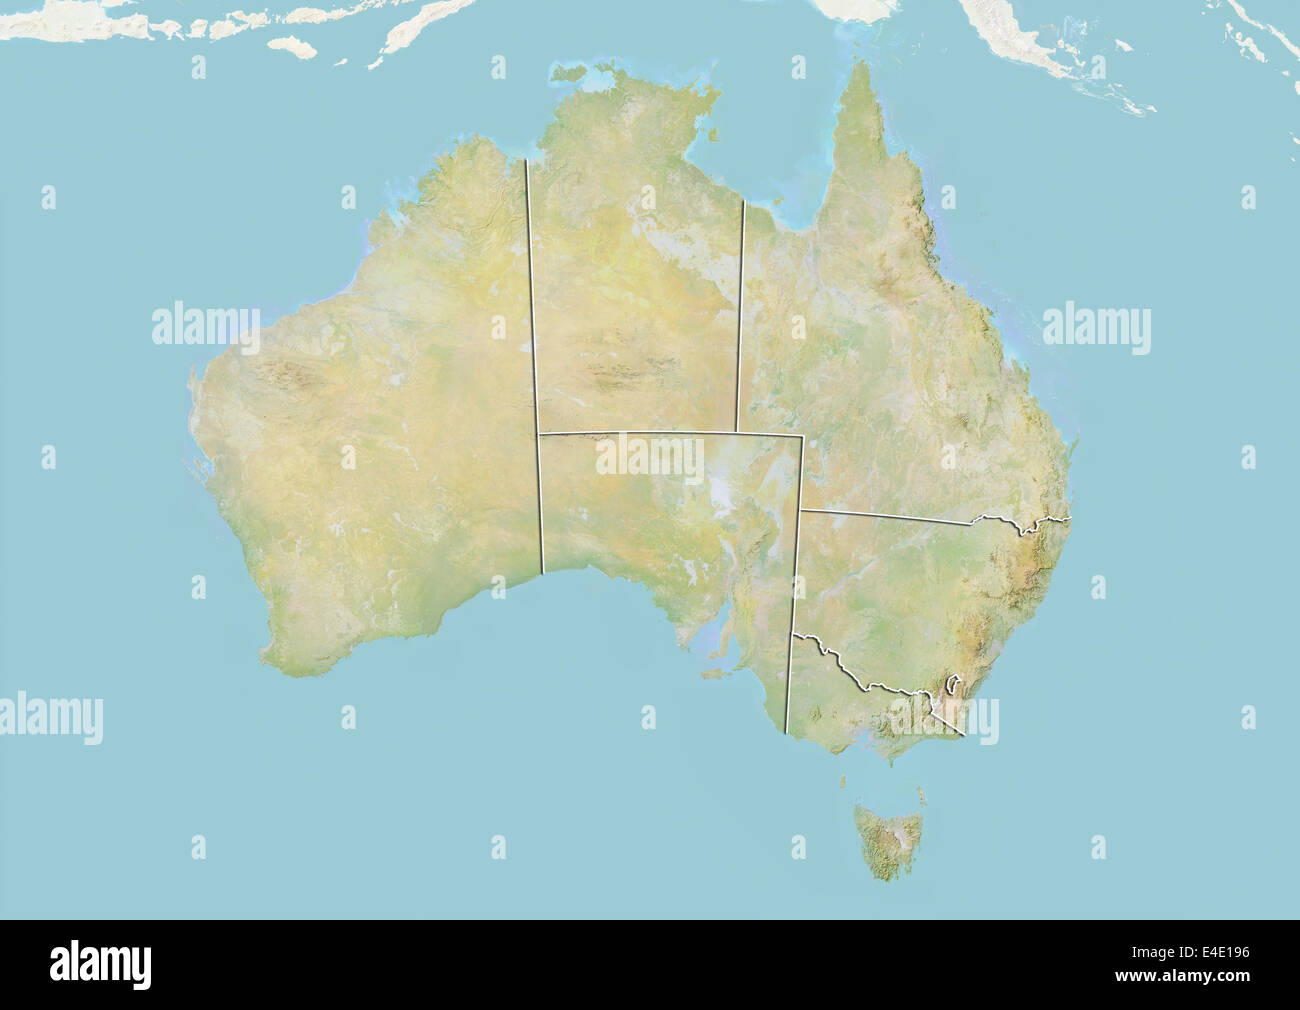 Australia, Relief Map With Boundaries of States Stock Photo